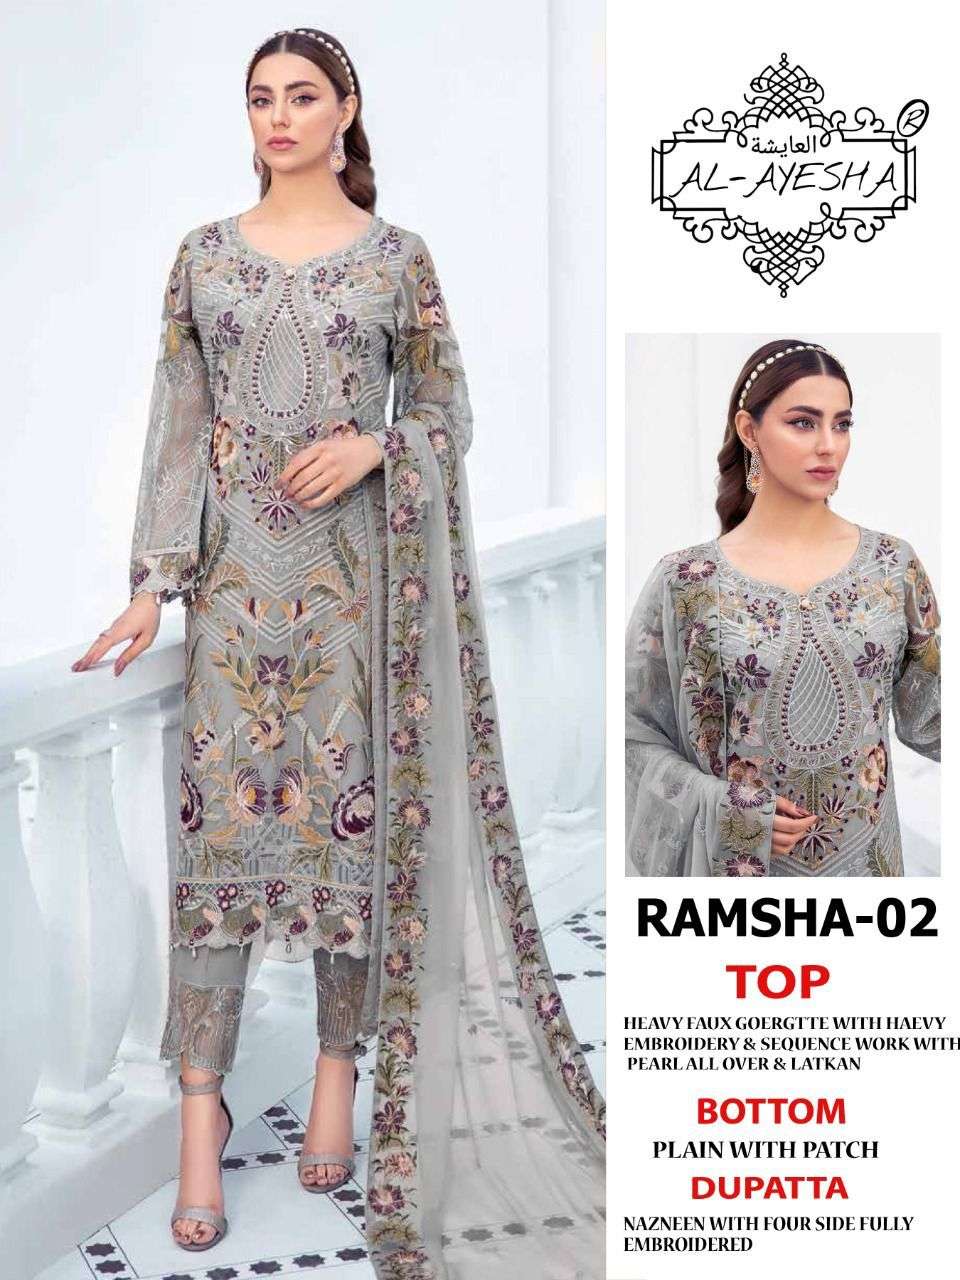 RAMSHA 02 BY AL AYESHA DESIGNER PAKISTANI SUITS BEAUTIFUL FANCY COLORFUL STYLISH PARTY WEAR & OCCASIONAL WEAR FAUX GEORGETTE EMBROIDERY DRESSES AT WHOLESALE PRICE